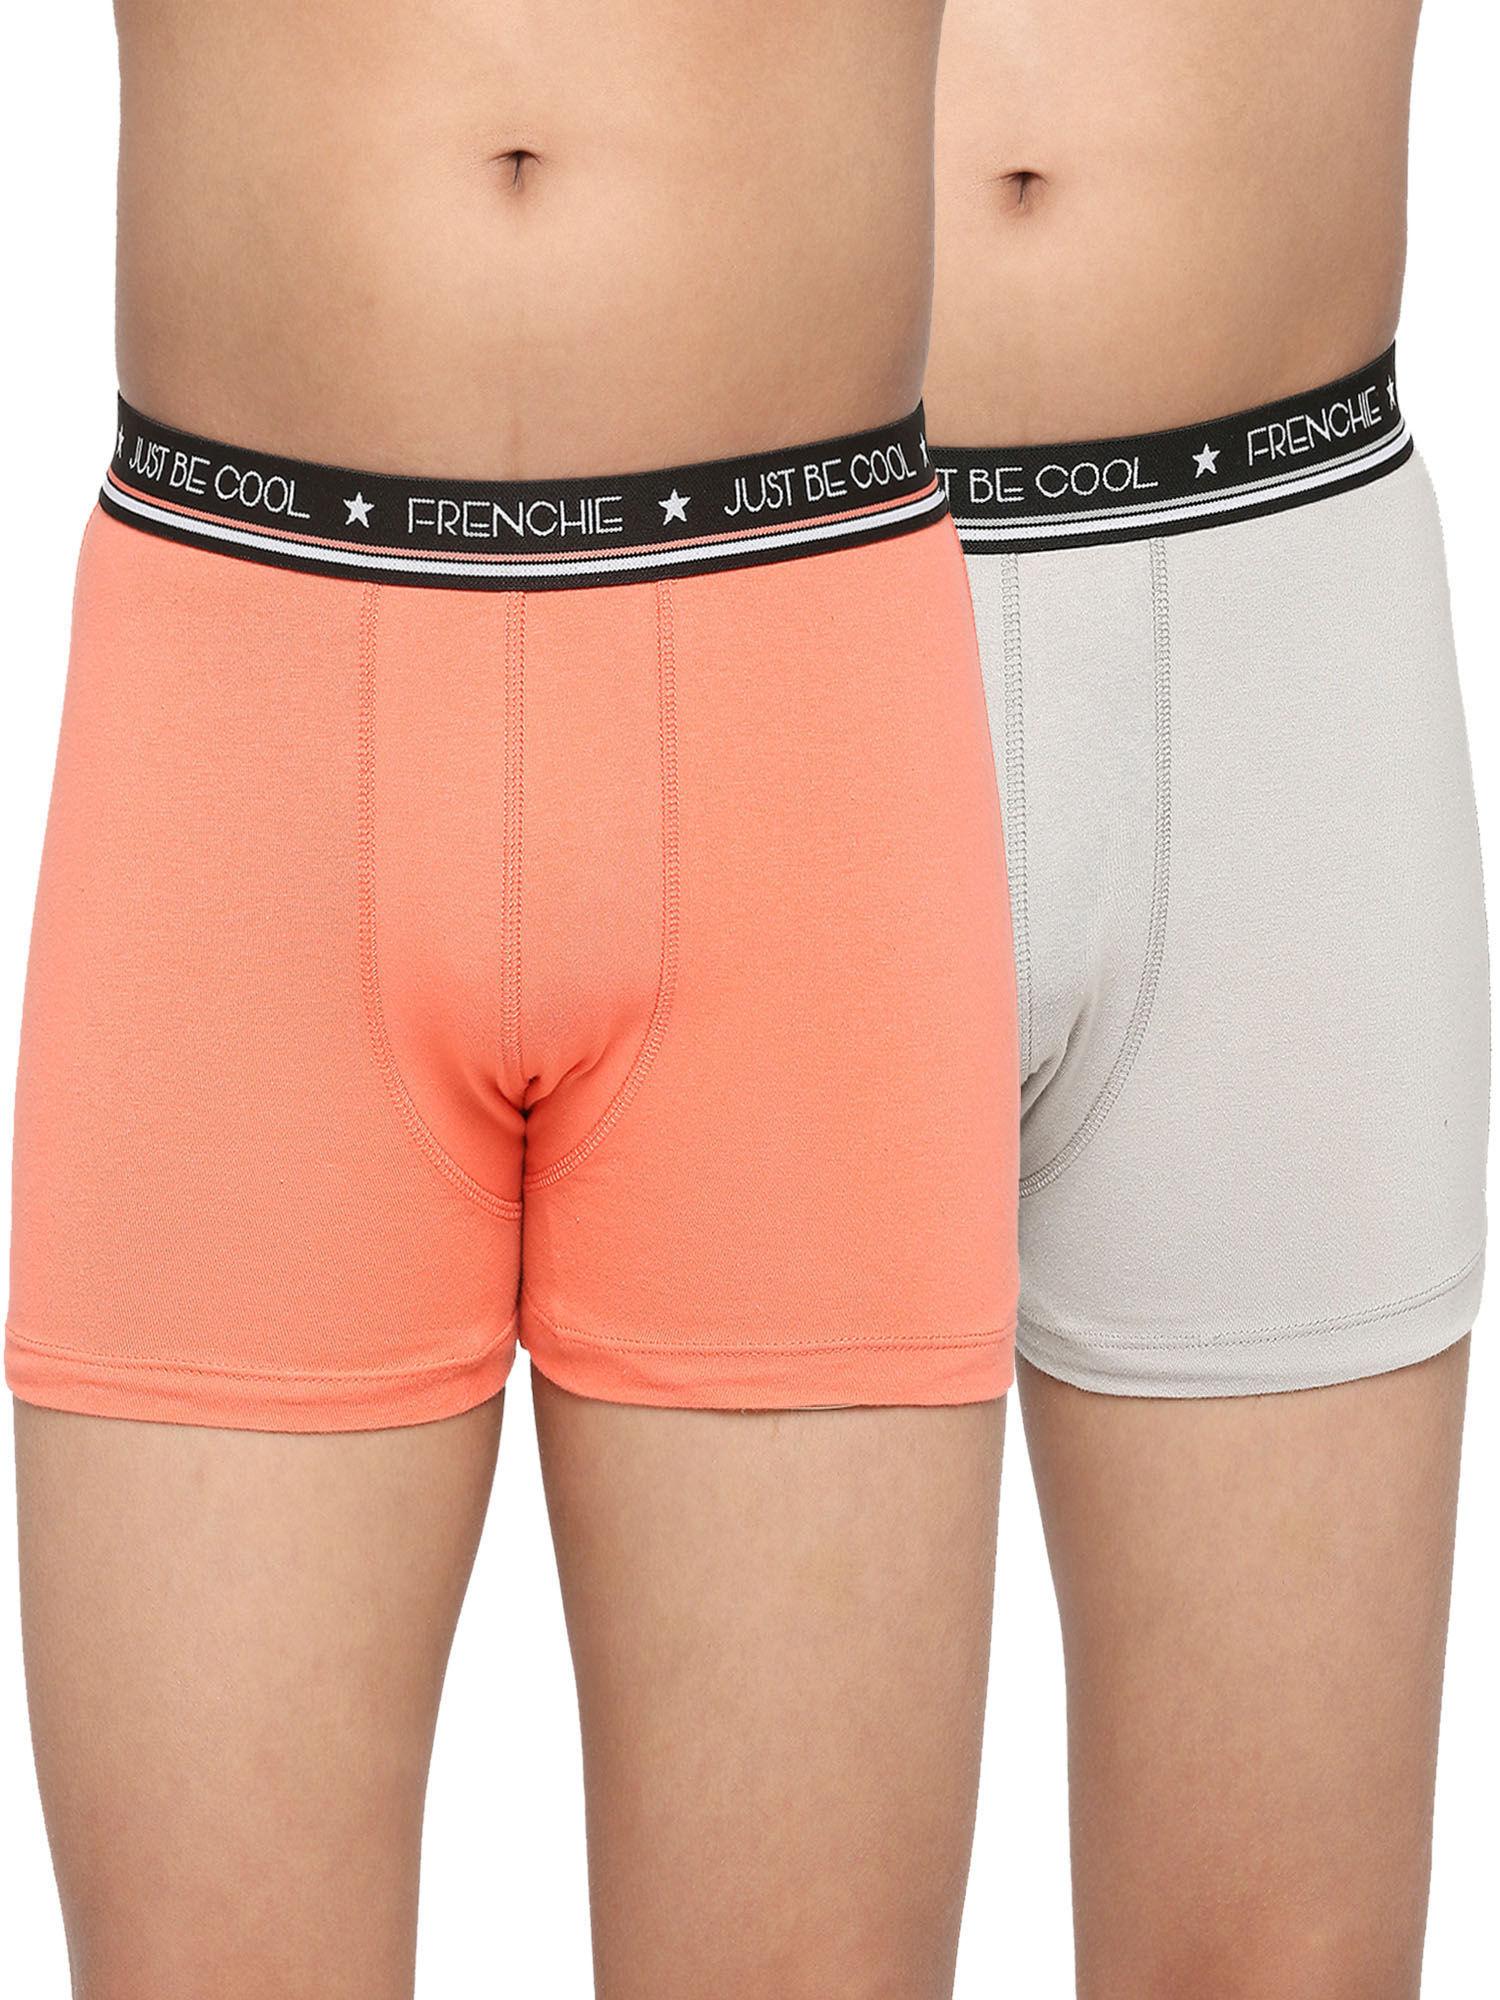 teenagers cotton trunk grey and peach (pack of 2)